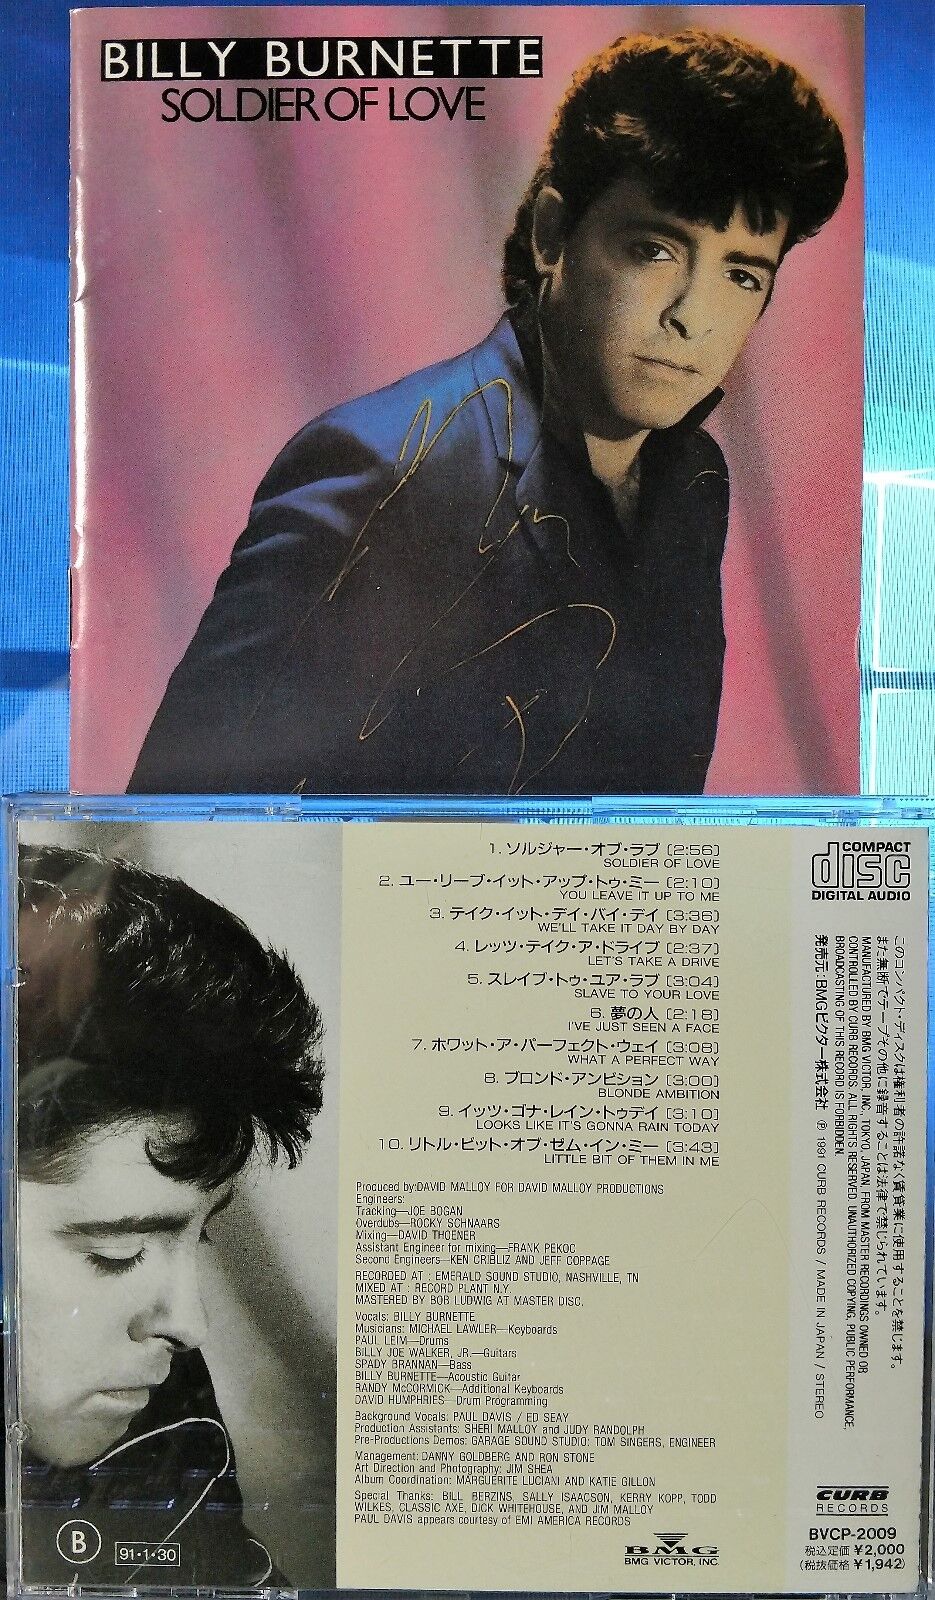 Billy Burnette - Soldier Of Love (CD, 1991, Curb Records, Japan) EXTREMELY RARE